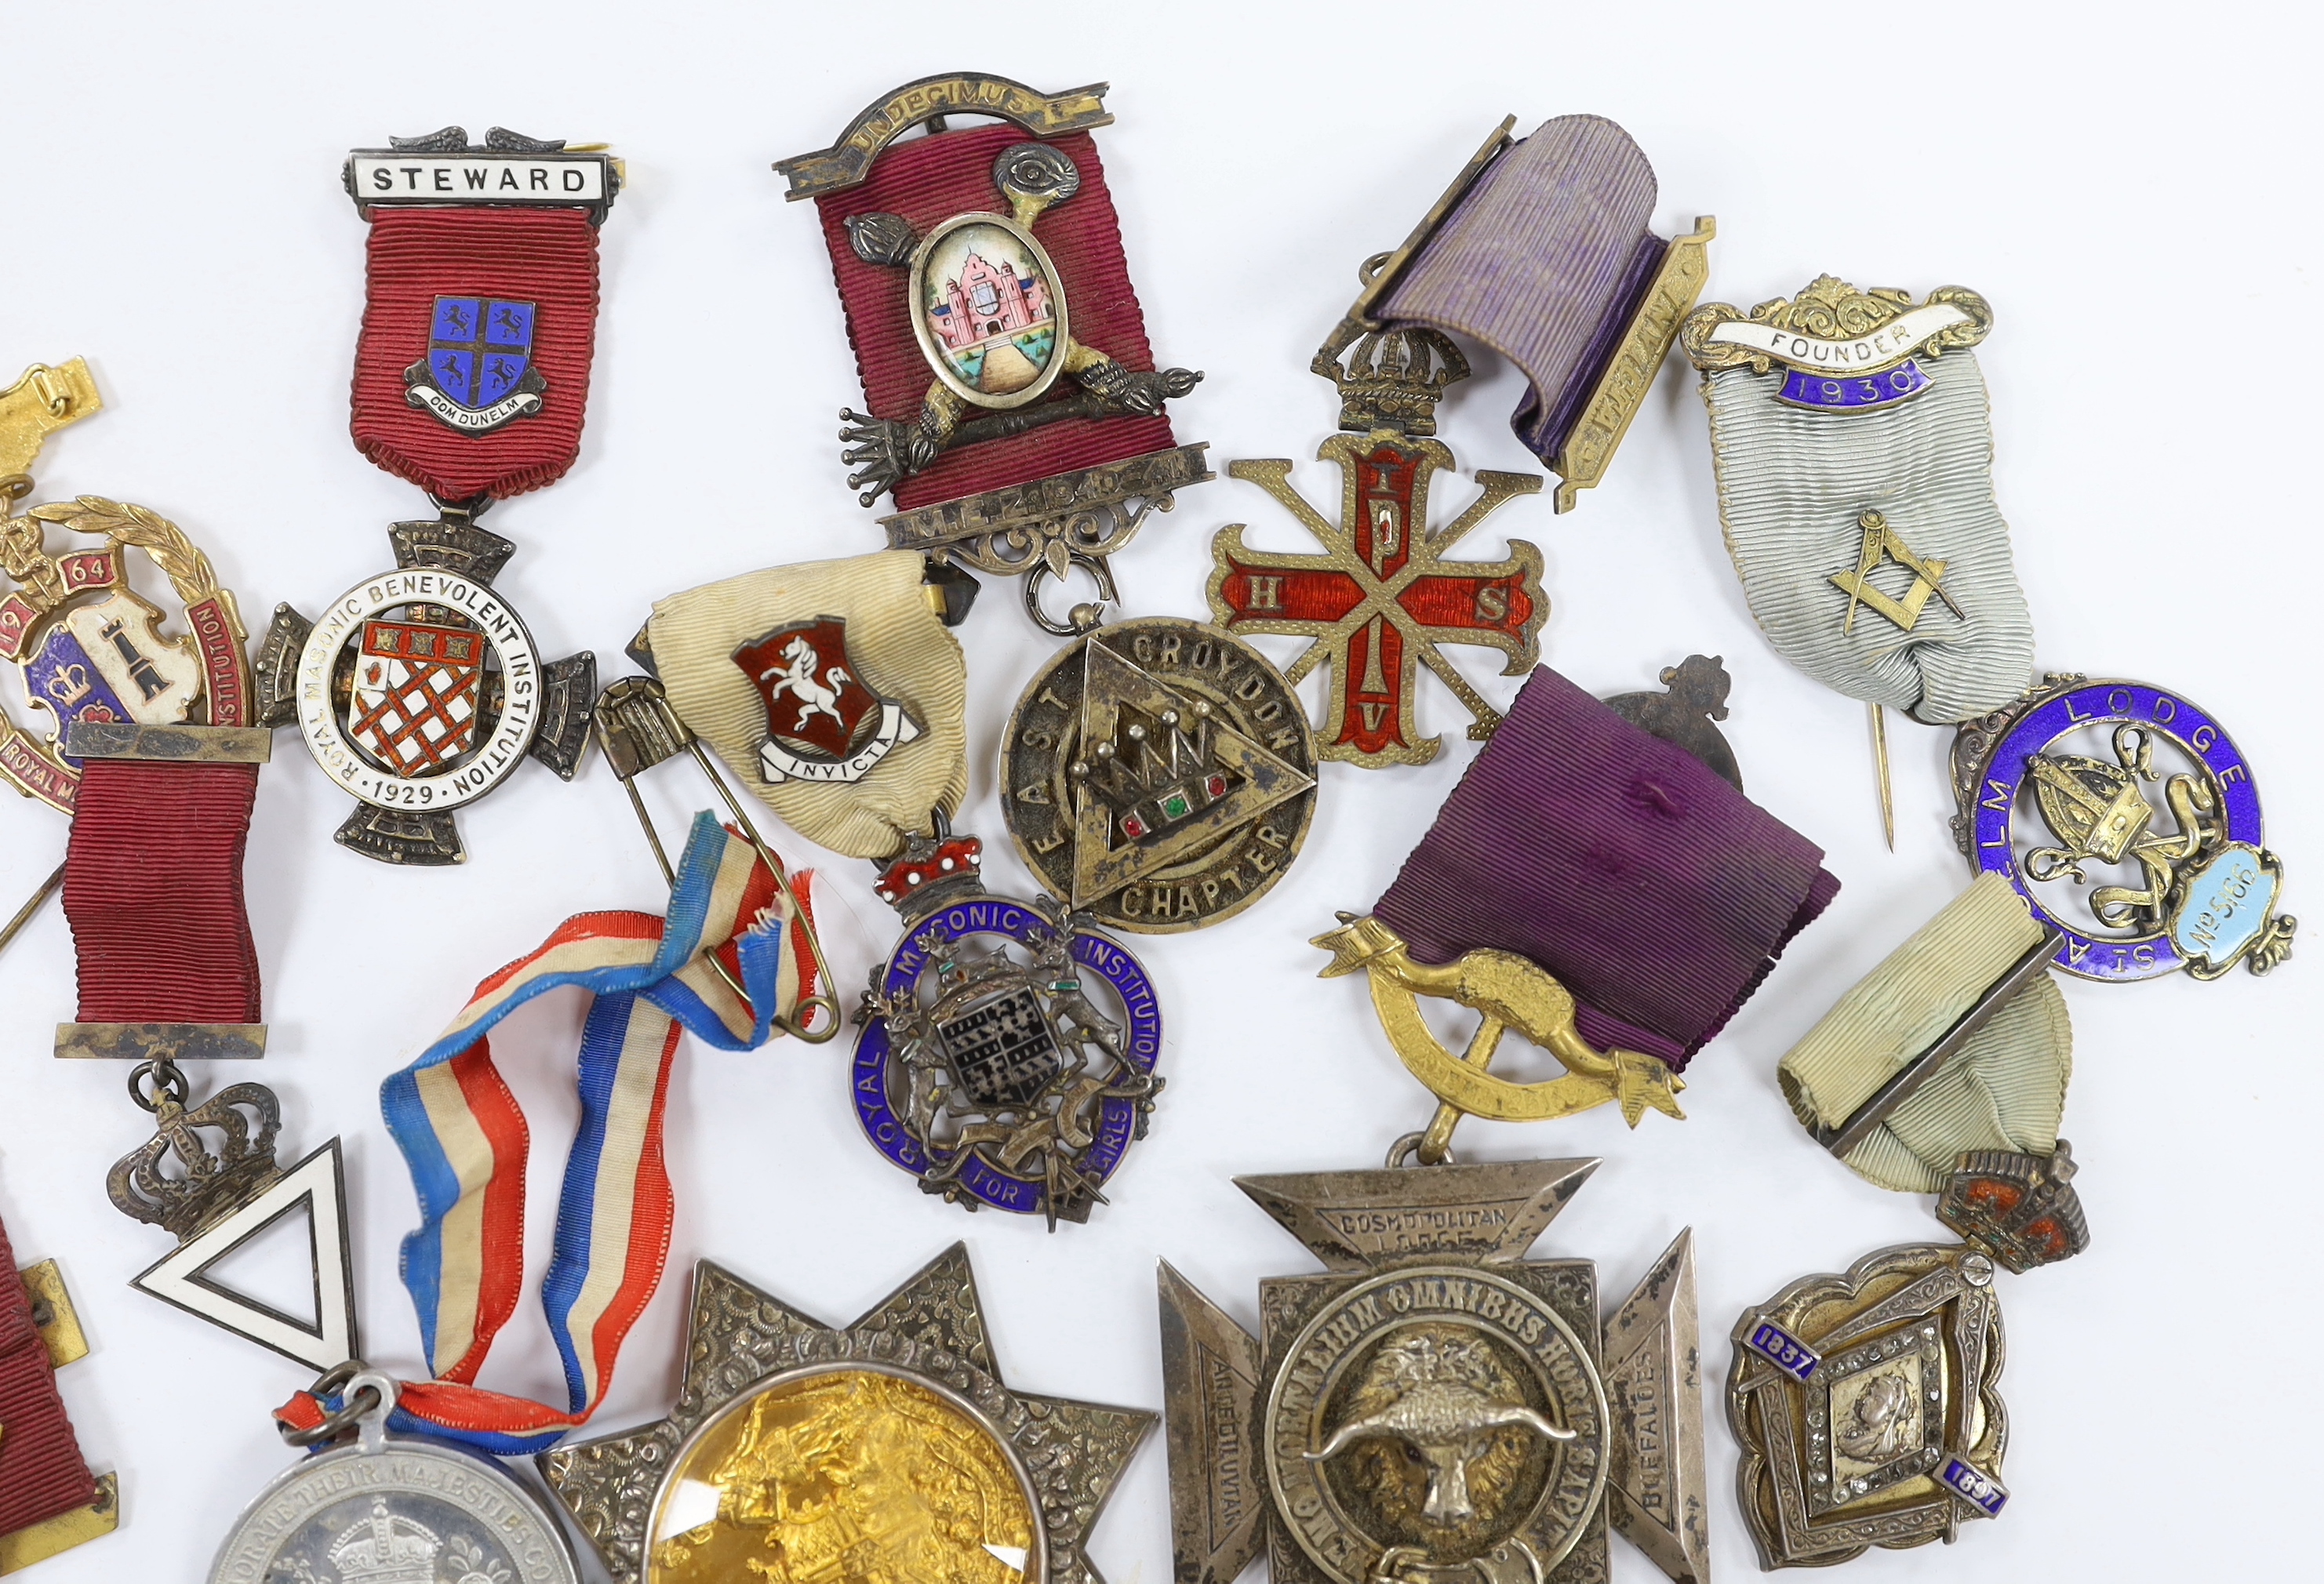 Fourteen Masonic and Order of Buffaloes medals, including enamelled examples, named lodges and silver hallmarked examples